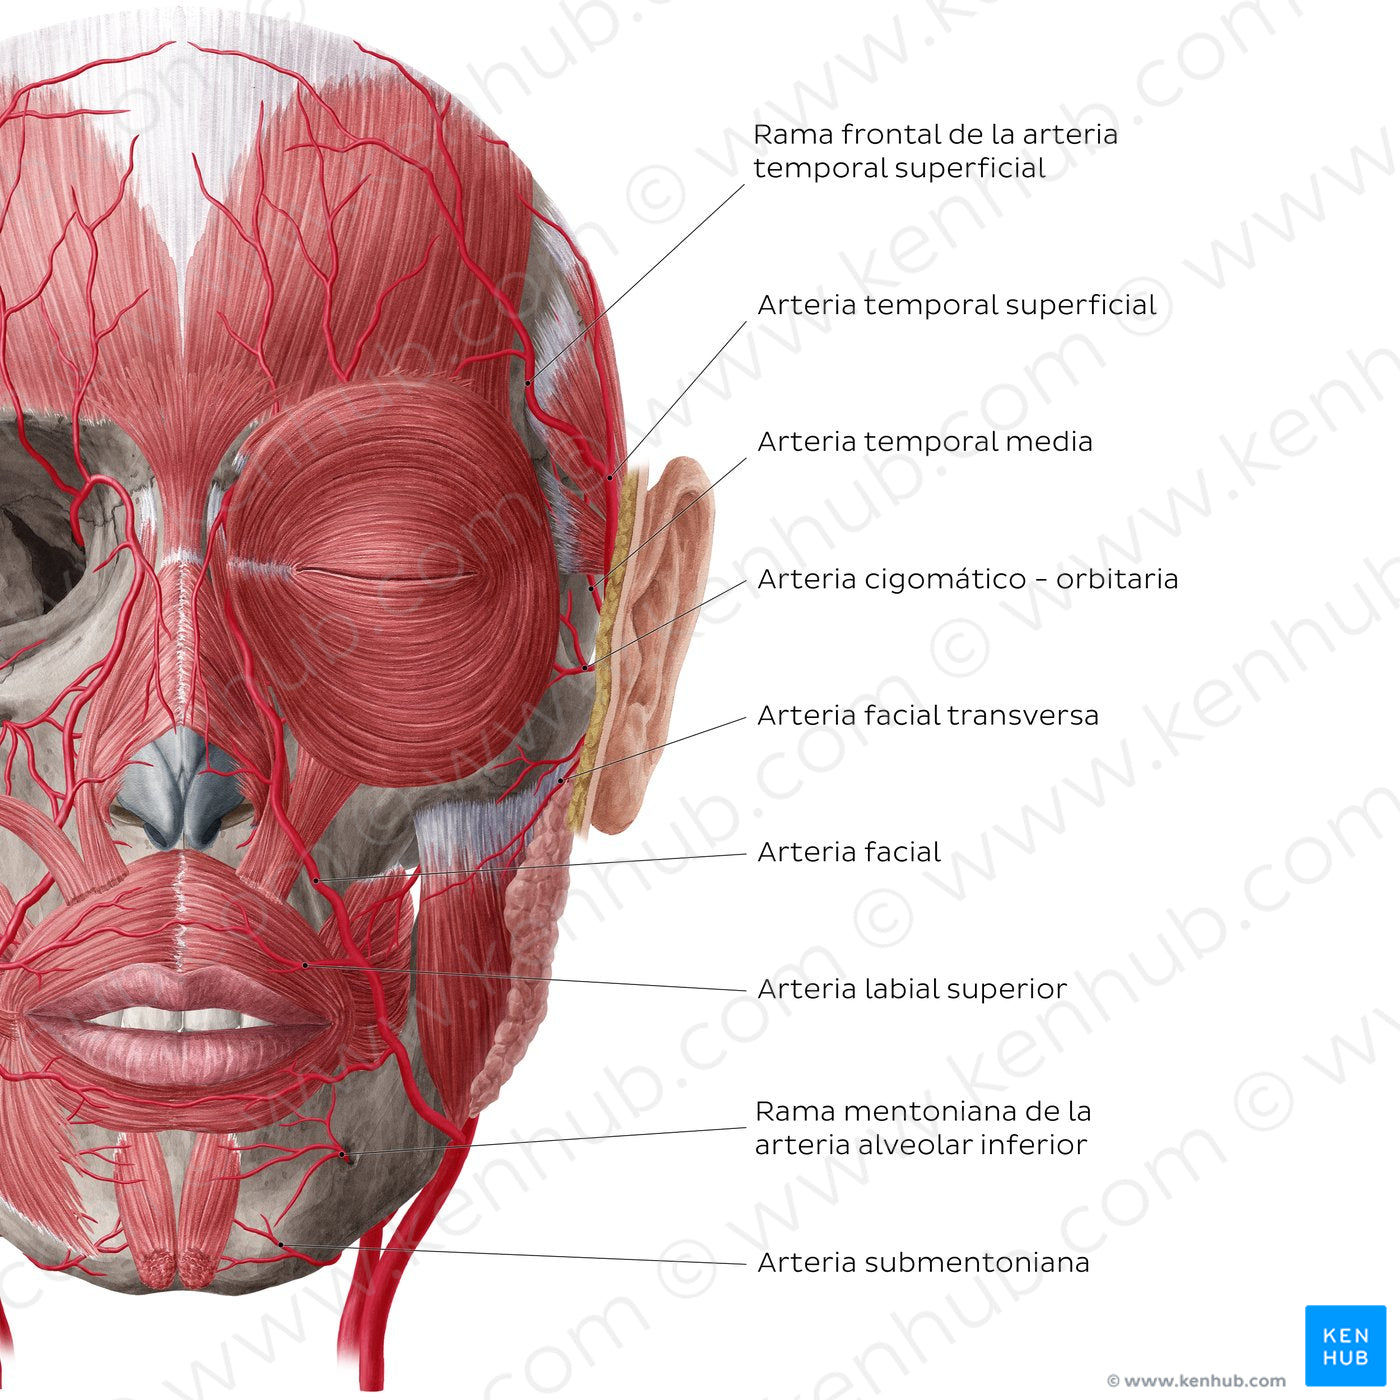 Arteries of face and scalp (Anterior view: superficial) (Spanish)